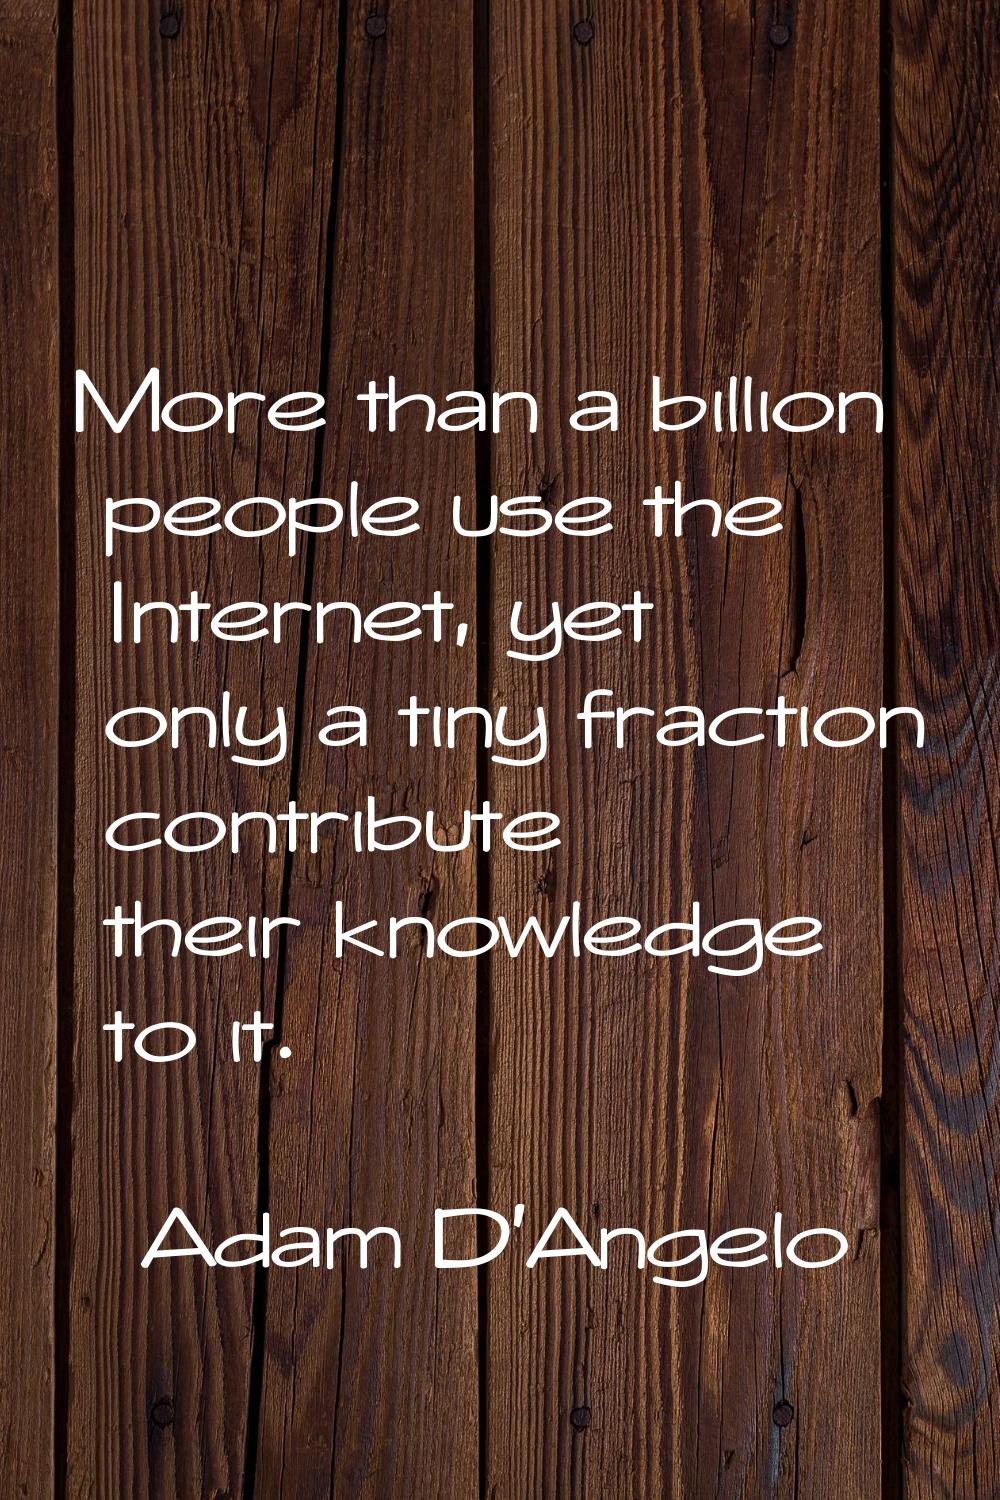 More than a billion people use the Internet, yet only a tiny fraction contribute their knowledge to